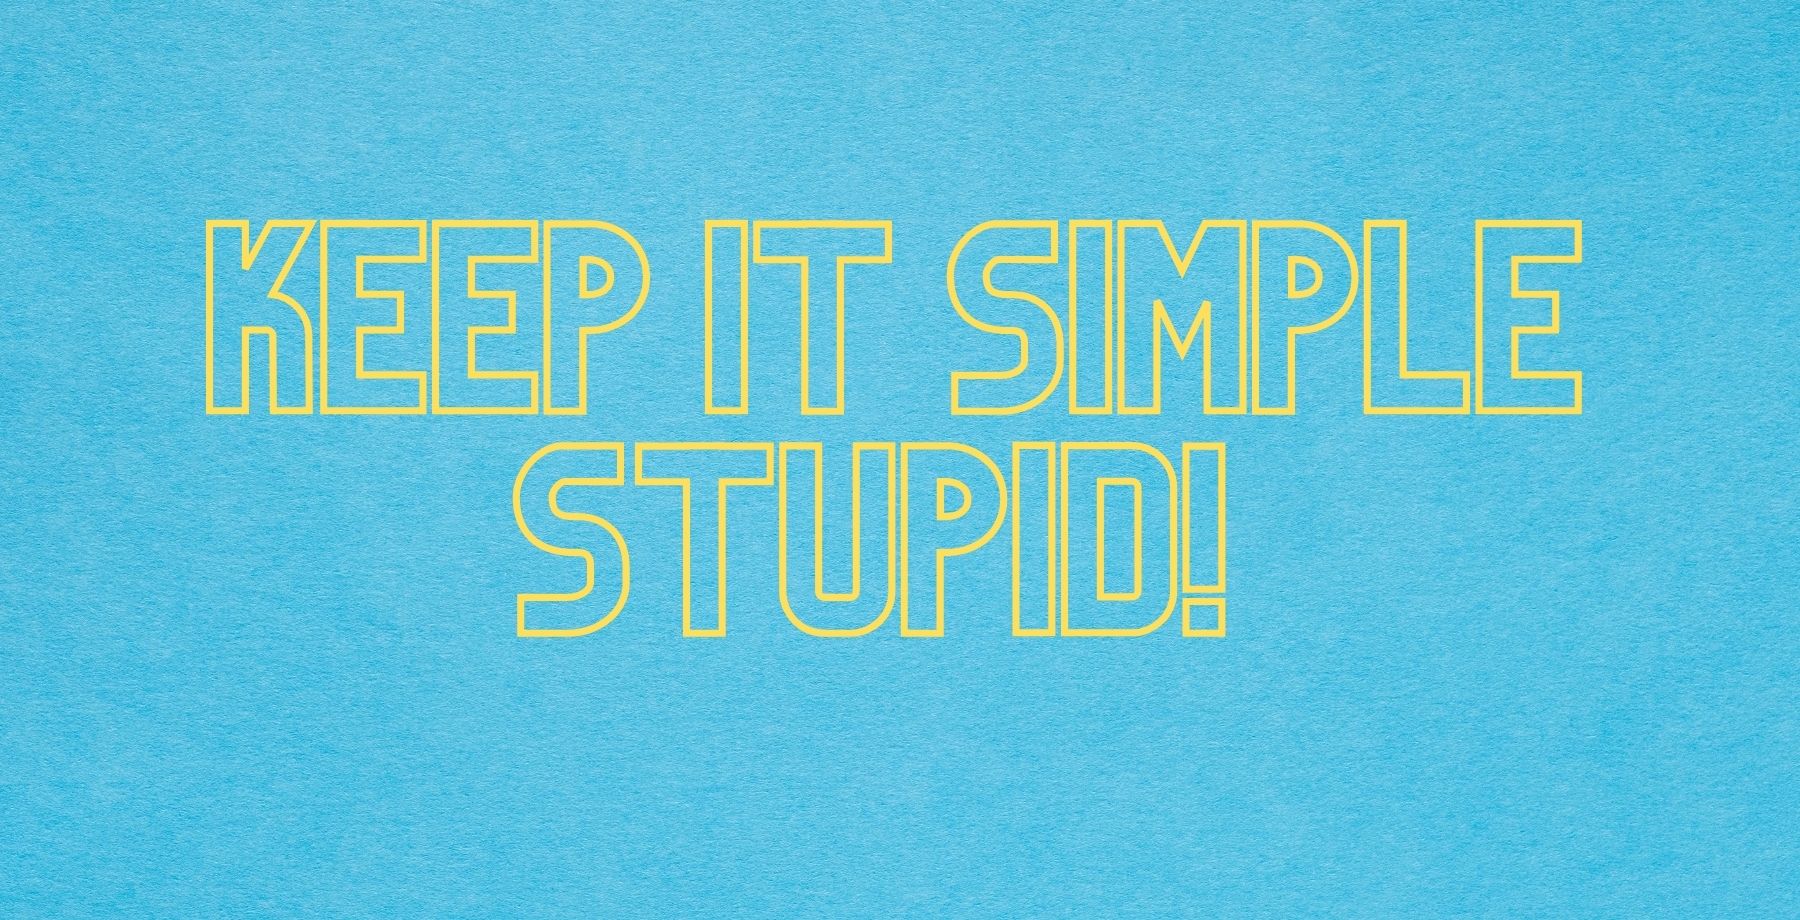 Keep it simple stupid as concept in legal writing